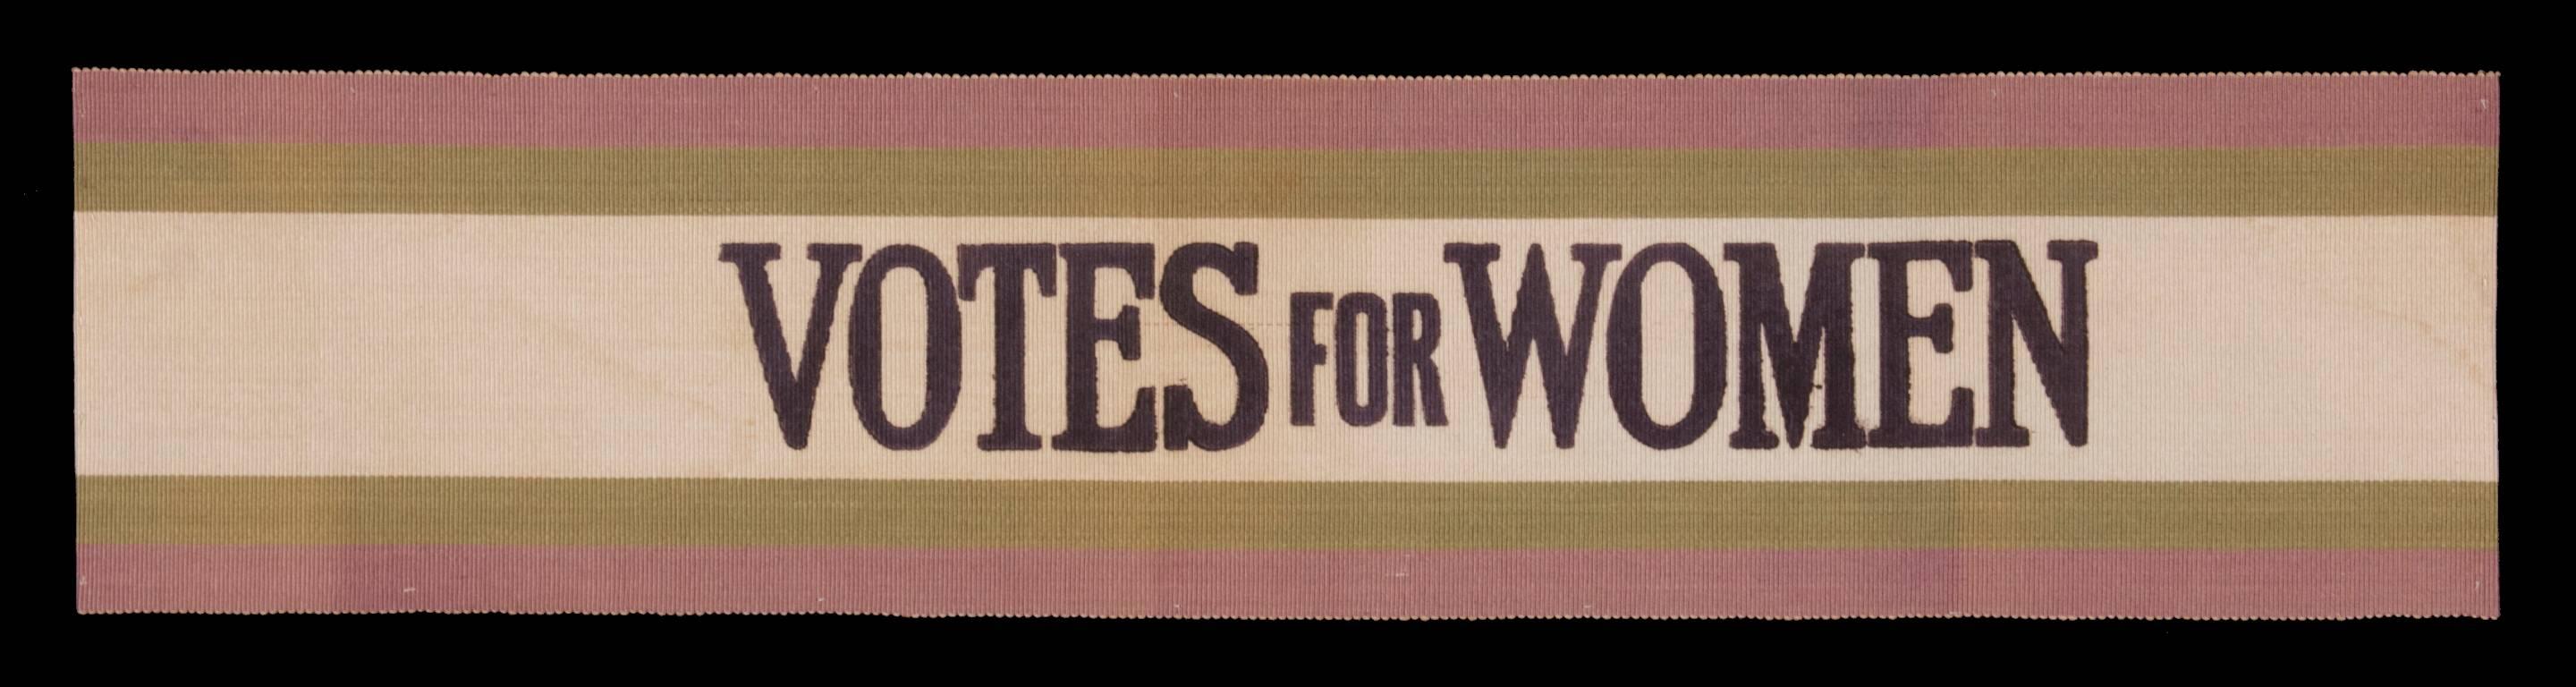 Section of wide silk ribbon, of the type often worn as a sash, with green and purple striping and printed black text that reads 